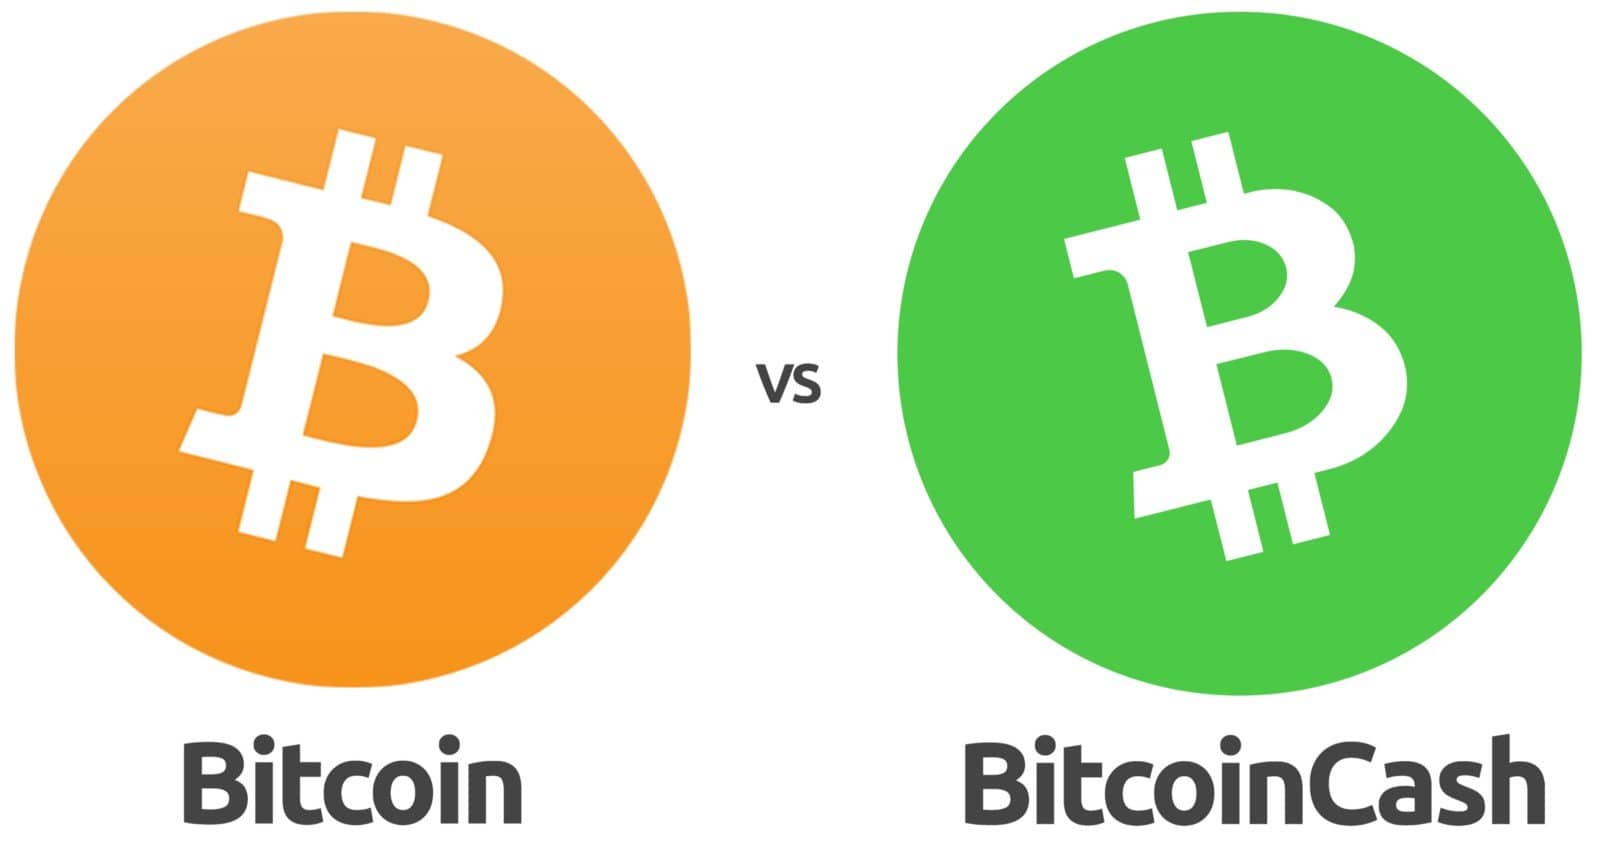 A comparison between Bitcoin and Bitcoin Cash